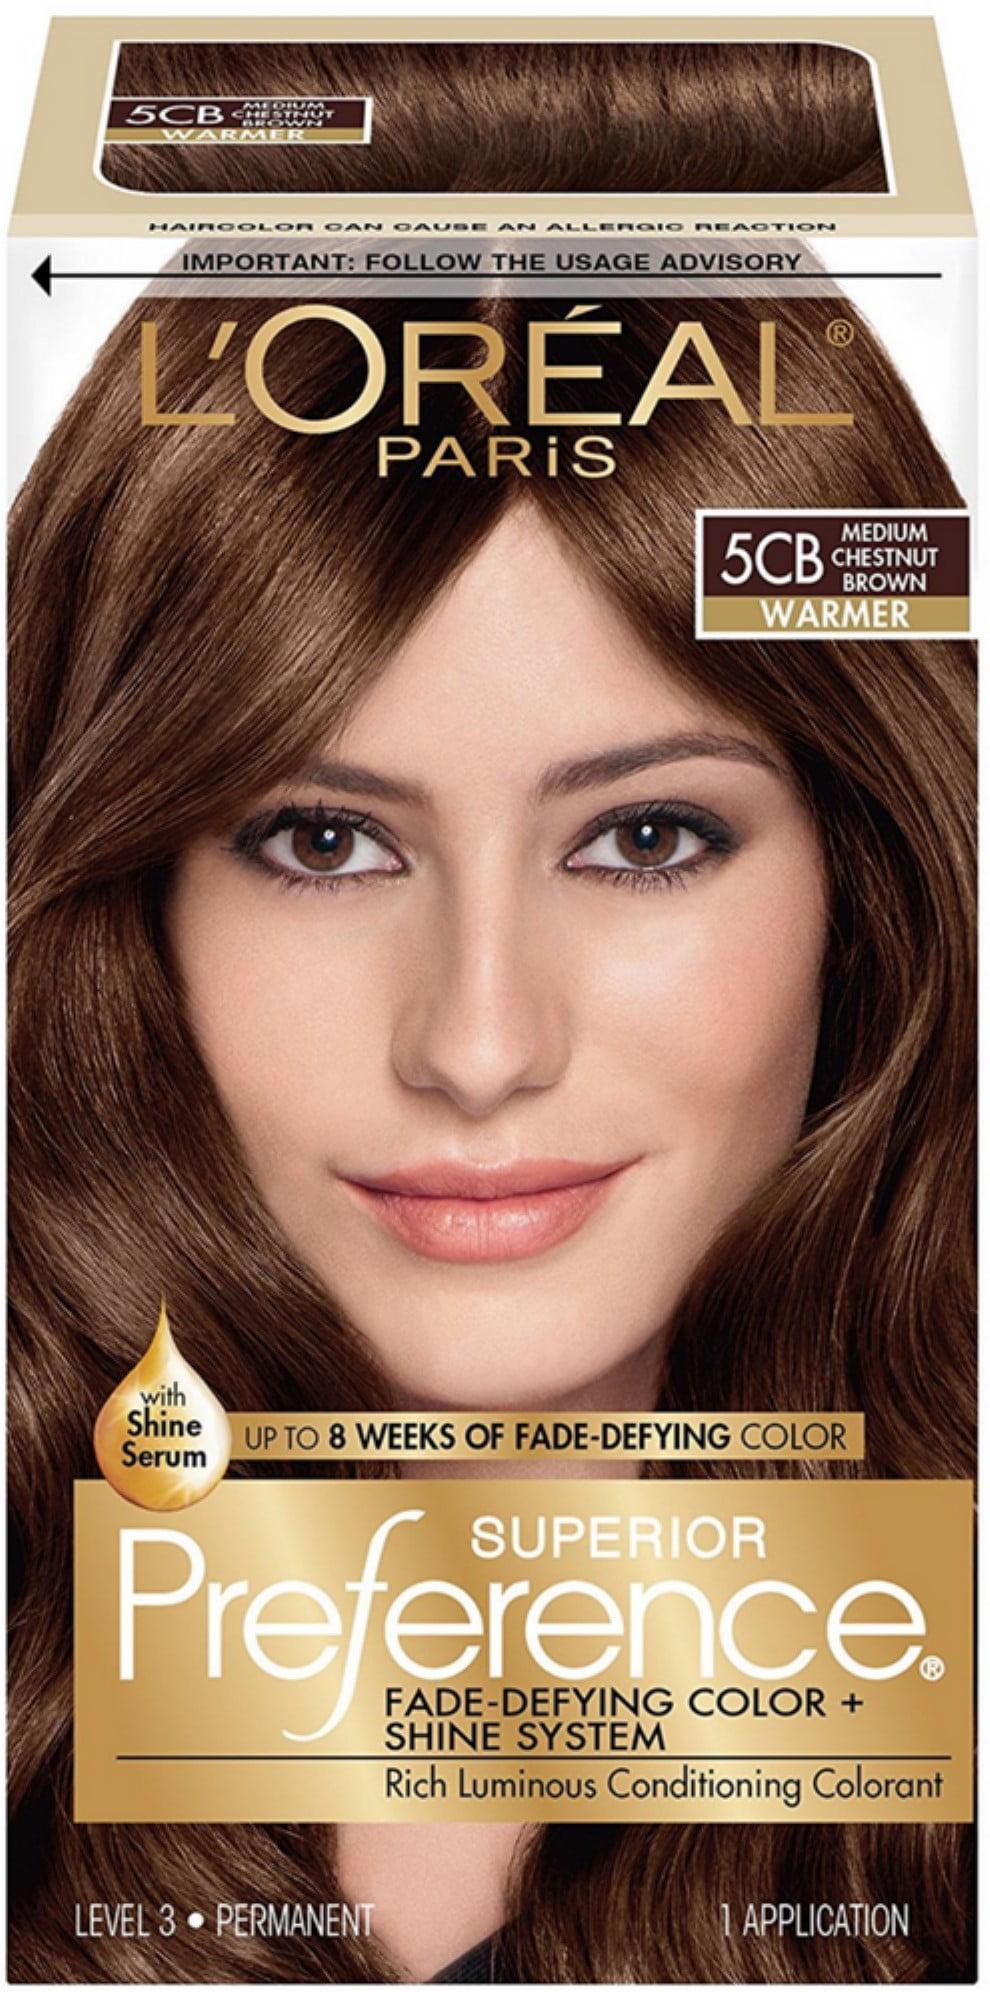 L'Oreal Paris Superior Preference Fade Defying Color & Shine System ...